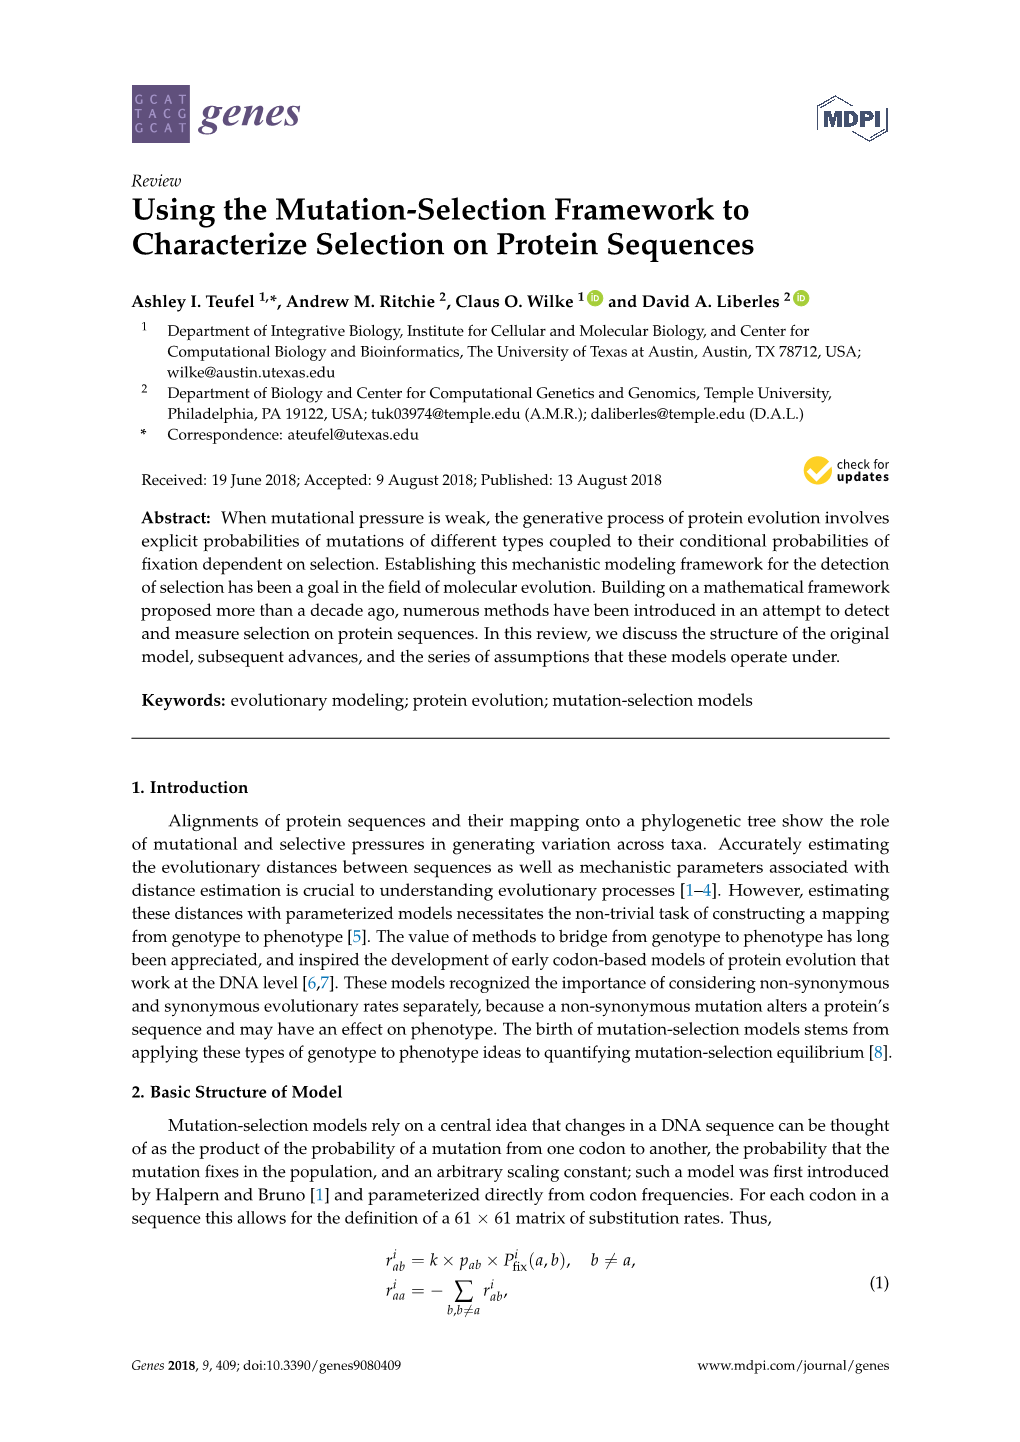 Using the Mutation-Selection Framework to Characterize Selection on Protein Sequences